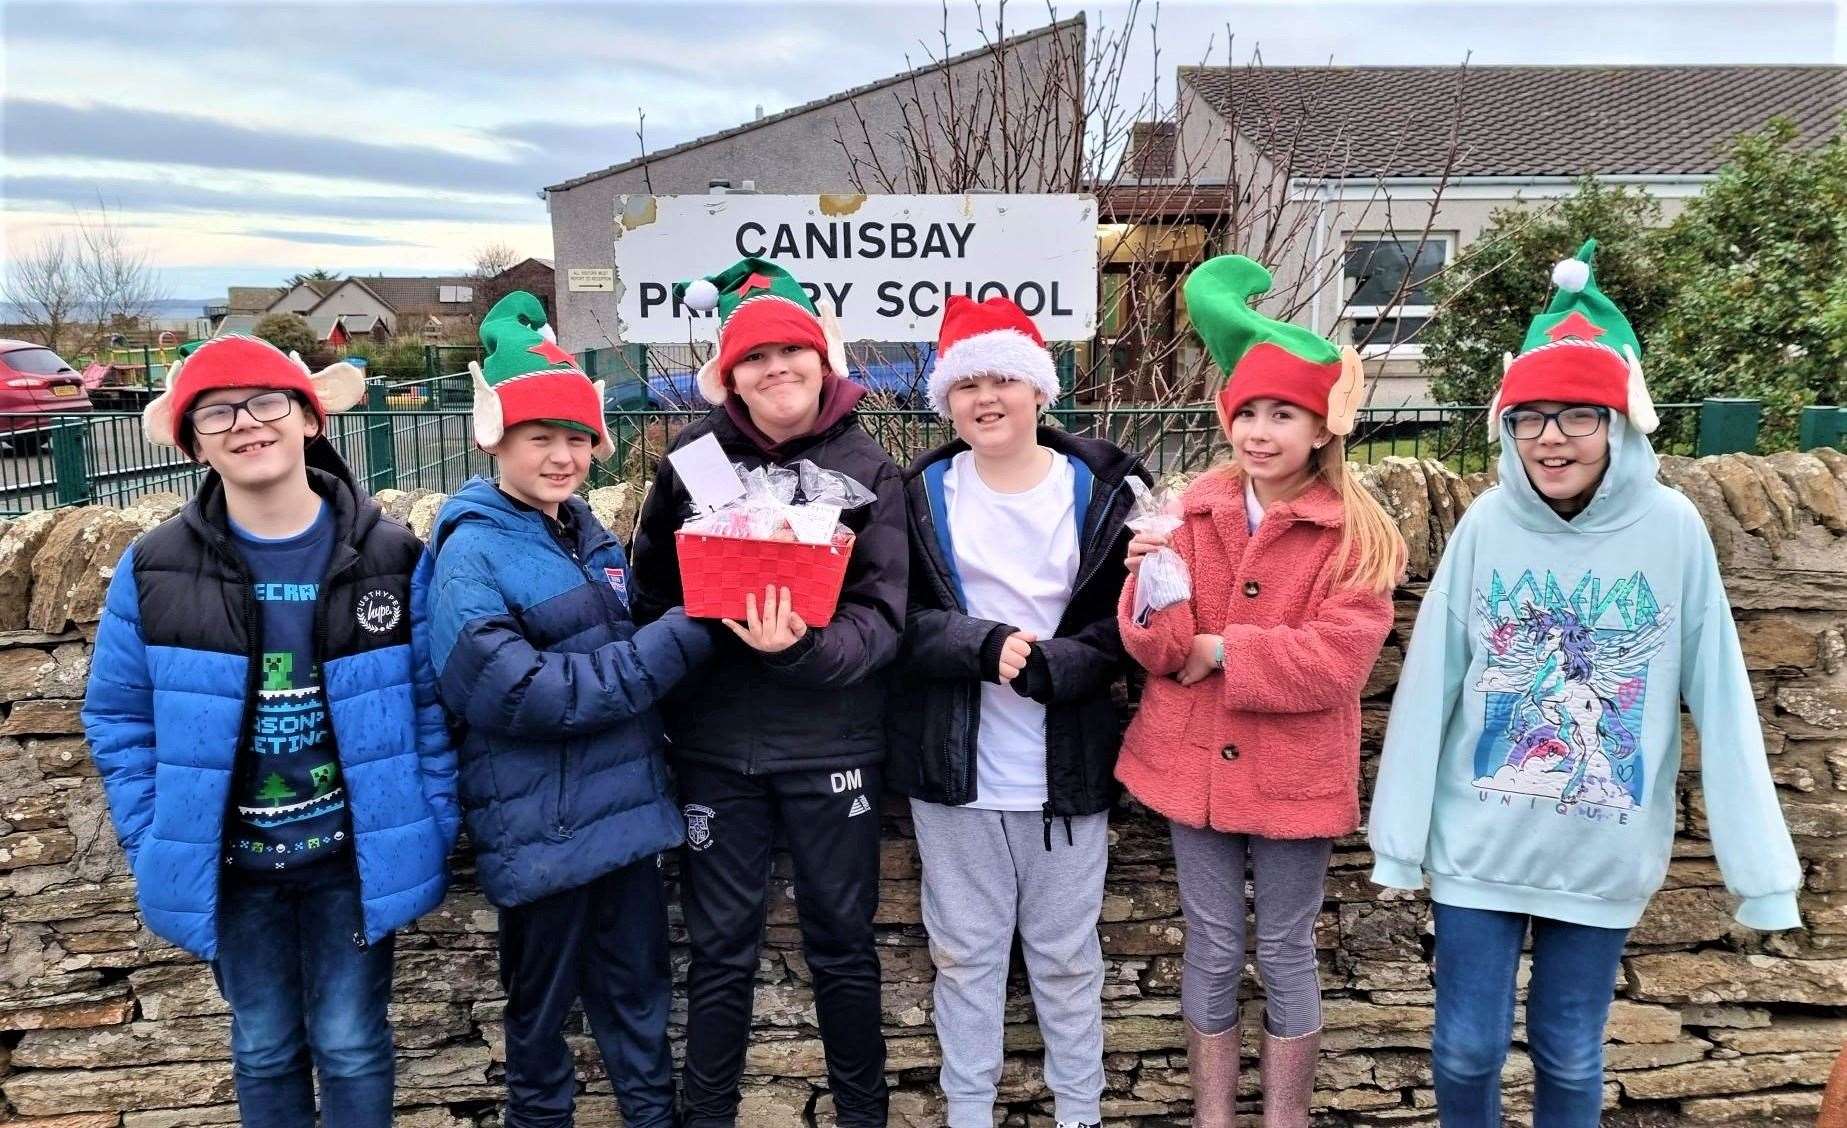 The pupils enjoyed giving gifts to the community.